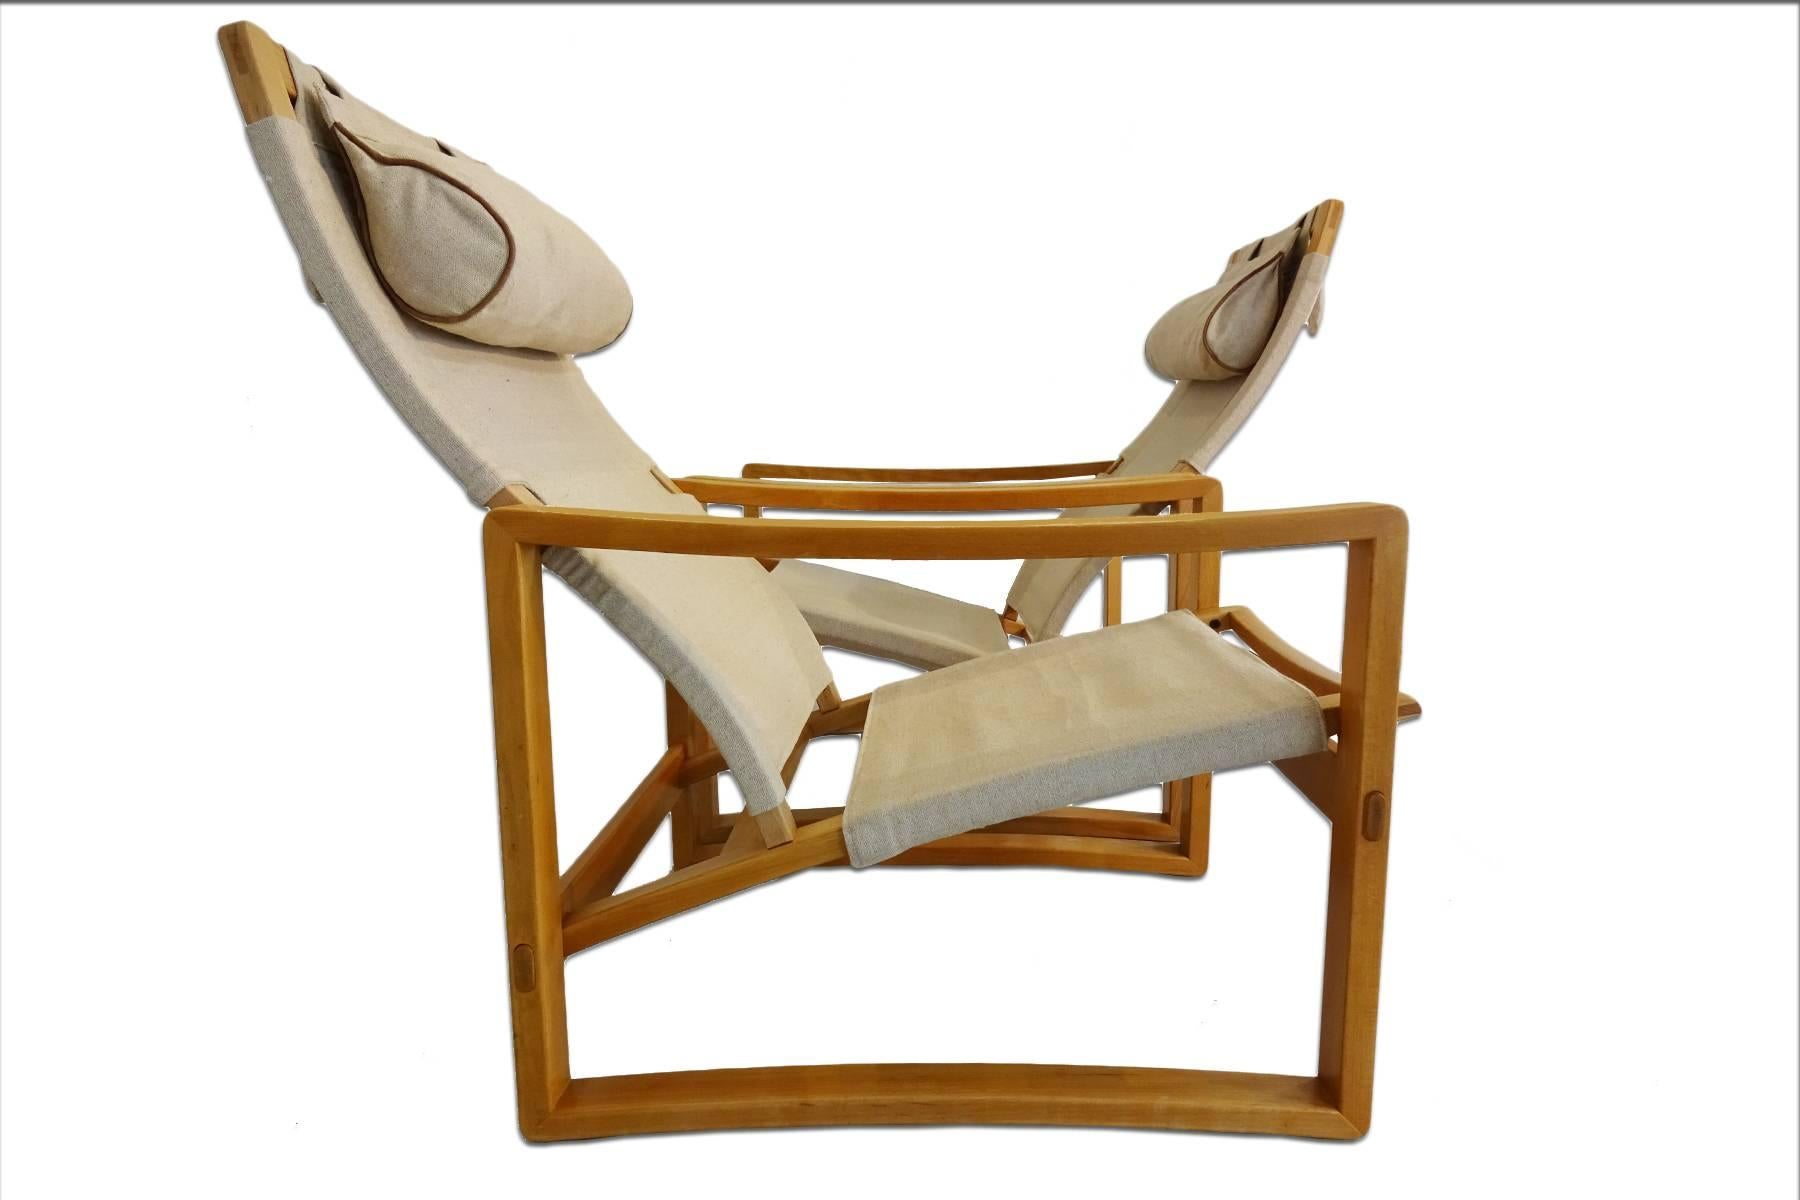 Hand-Crafted Very Rare Pair of Mid-Century Børge Jensen & Sønner ‘Safari’ Lounge Chairs For Sale